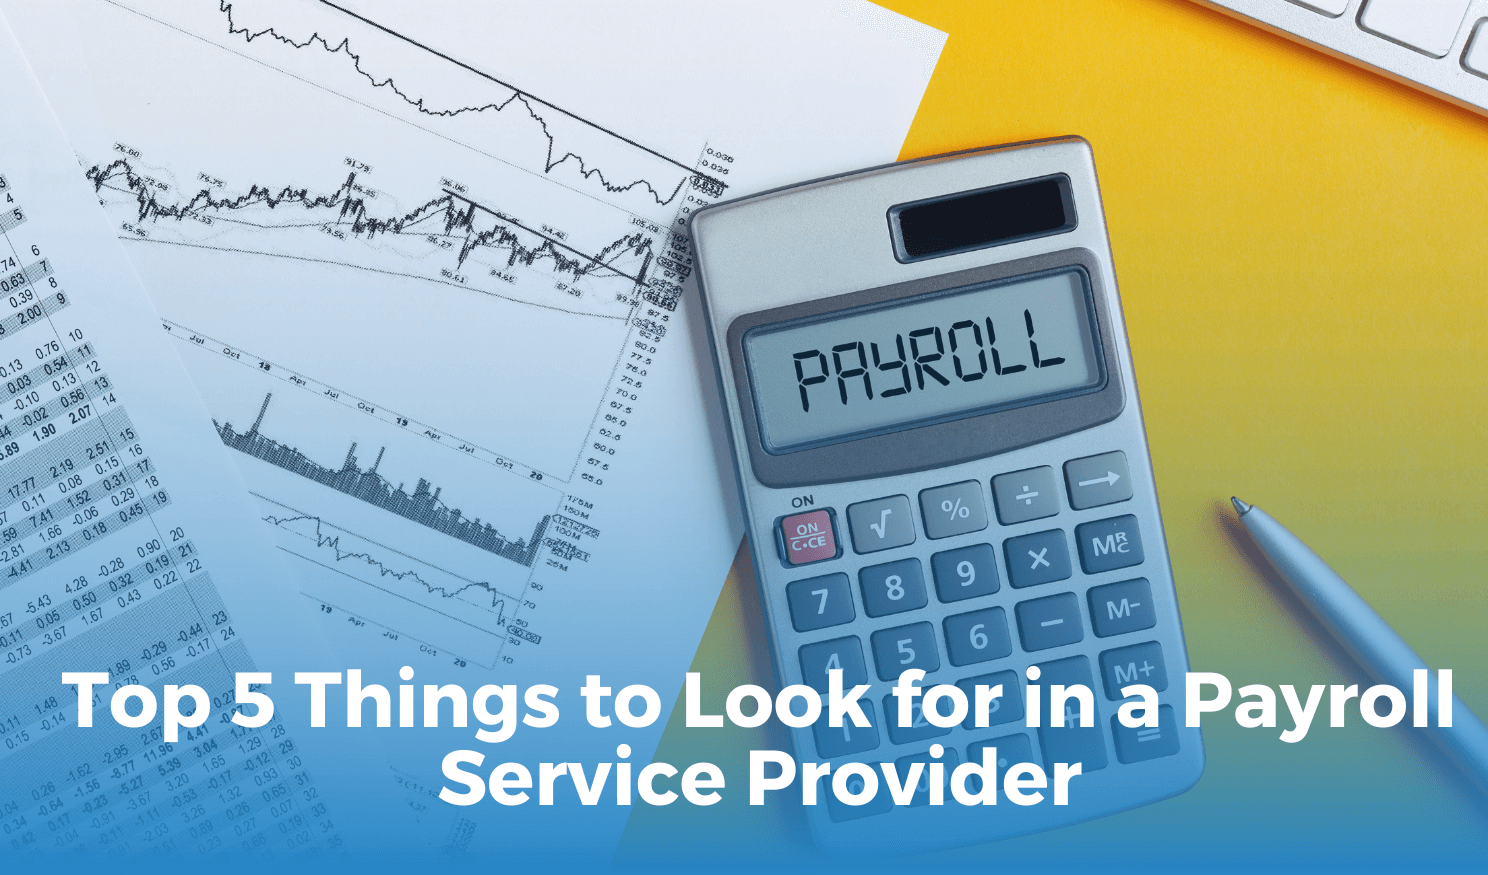 Top 5 Things to Look for in a Payroll Service Provider